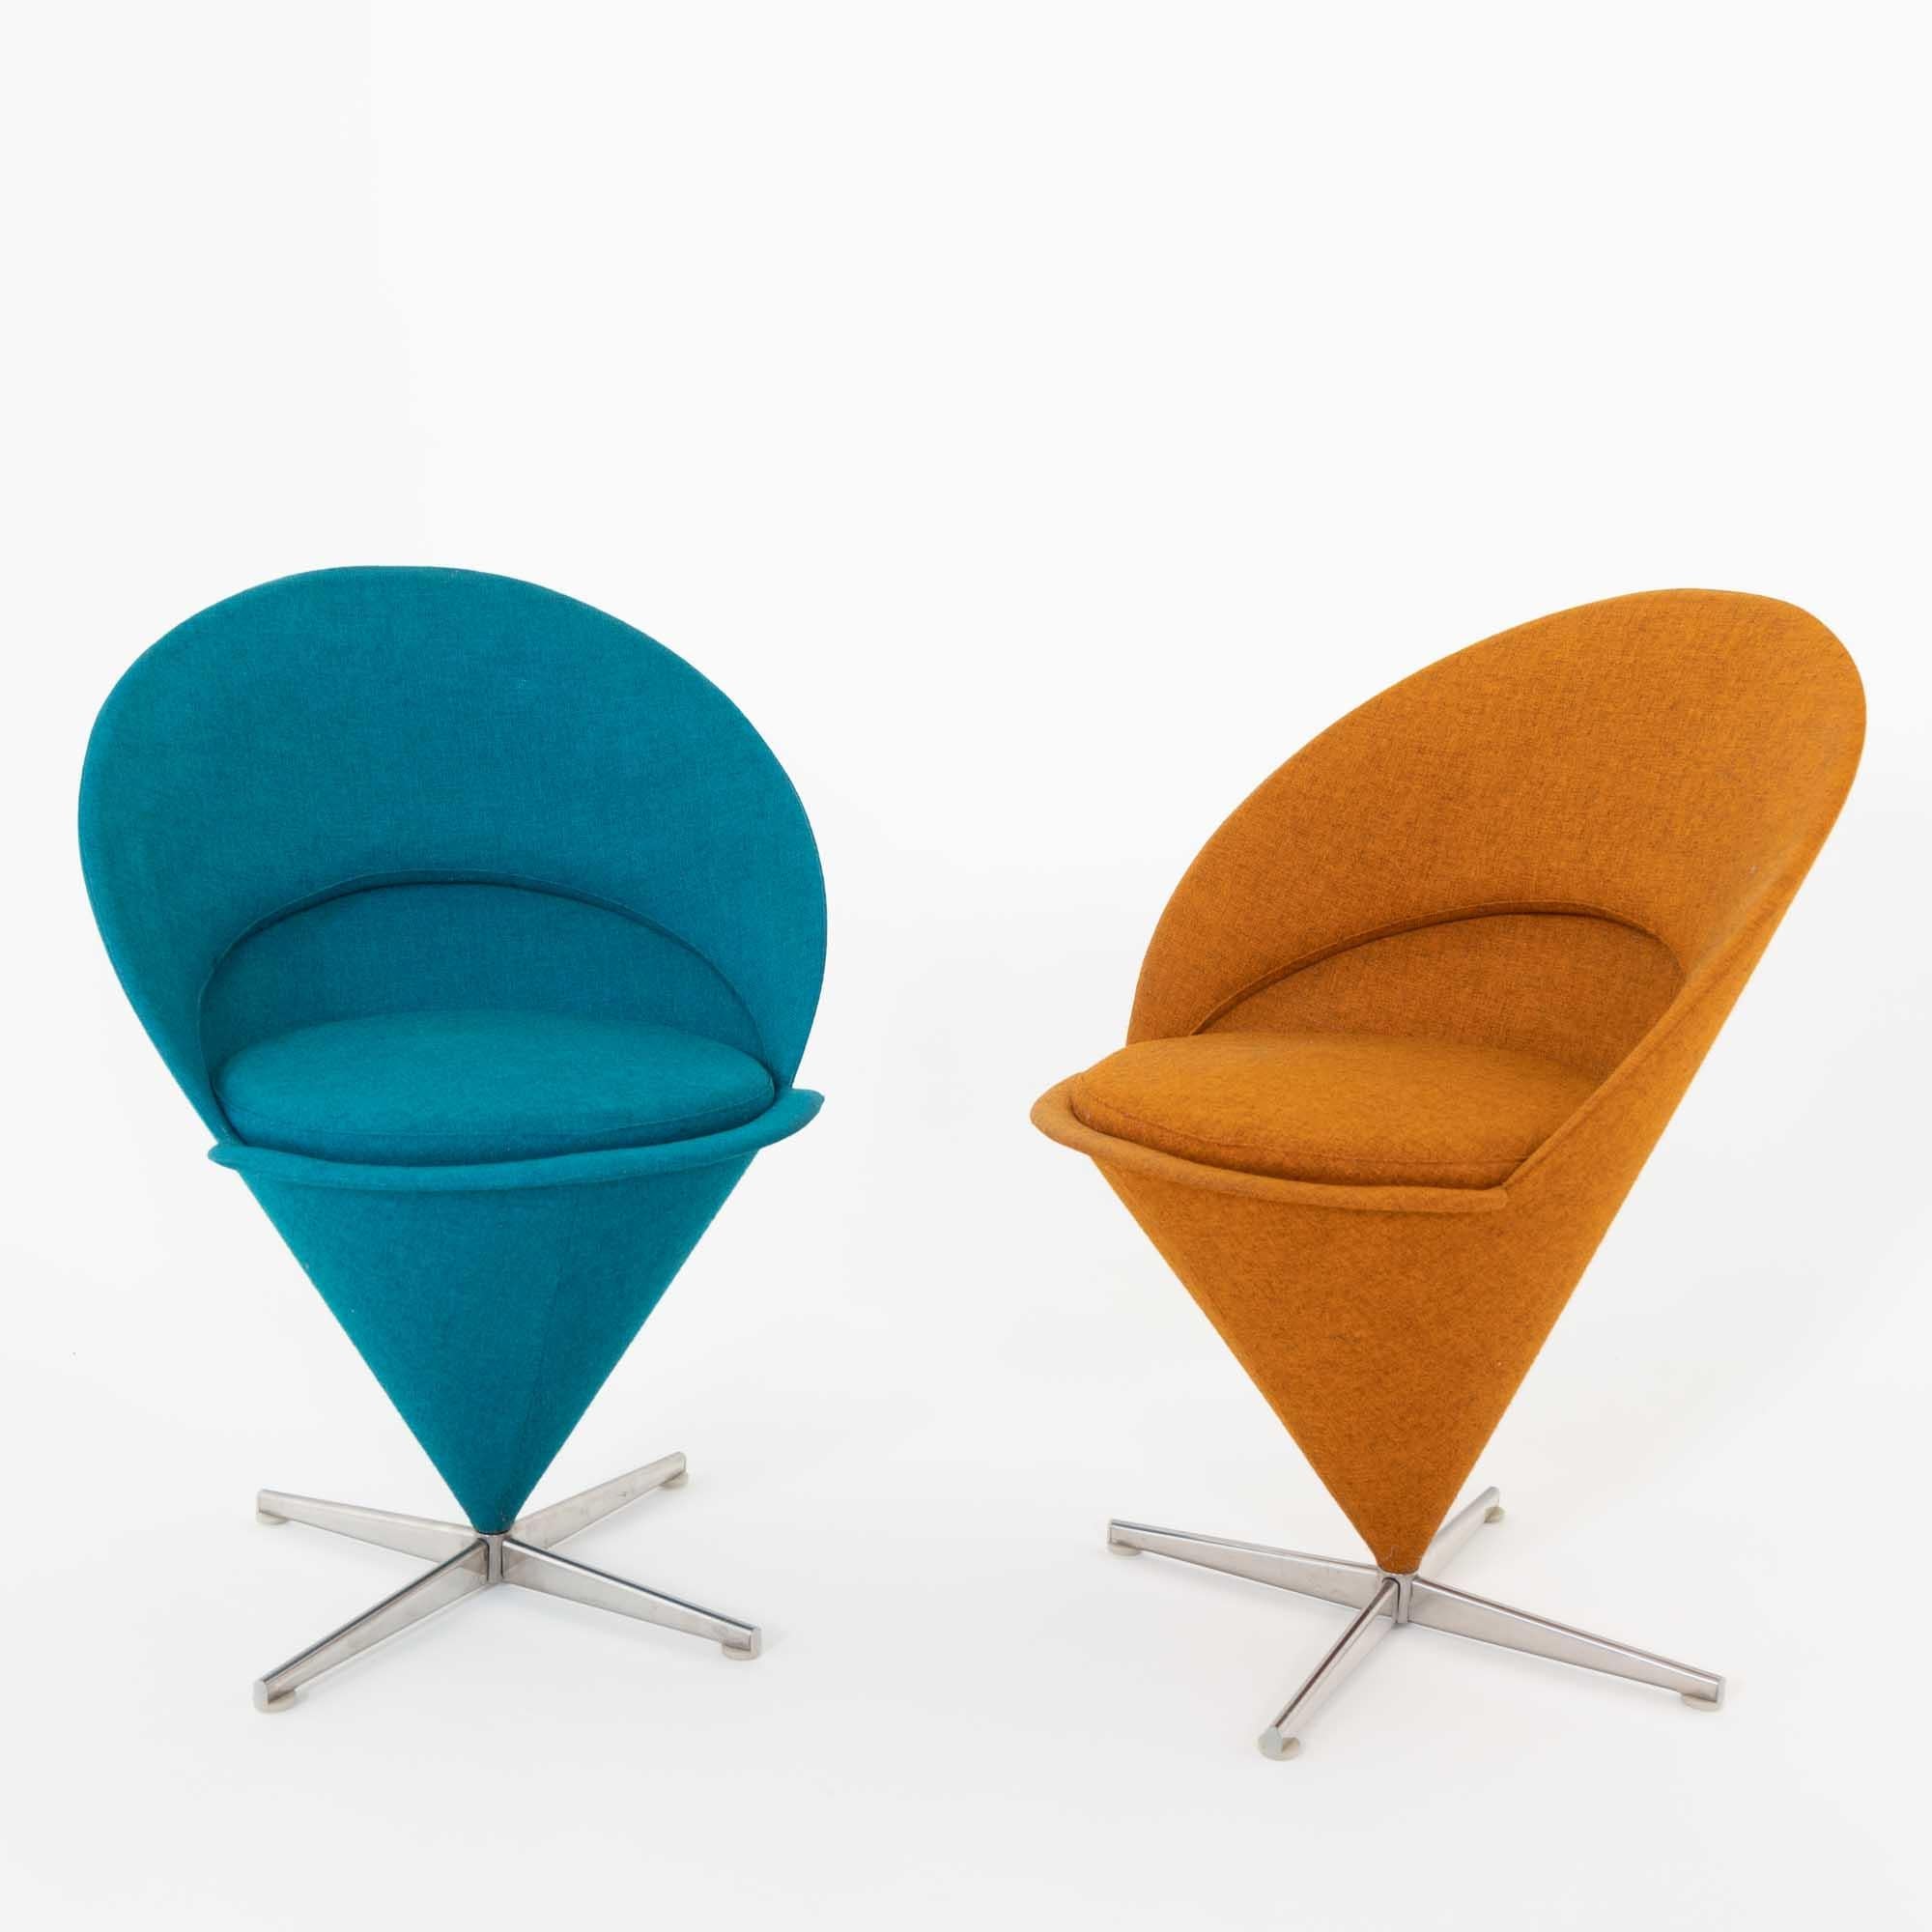 Two Cone chairs by Verner Panton on x-shaped aluminium frame and conical form with round seat and high backrest. One chair with orange, the other with blue cover.